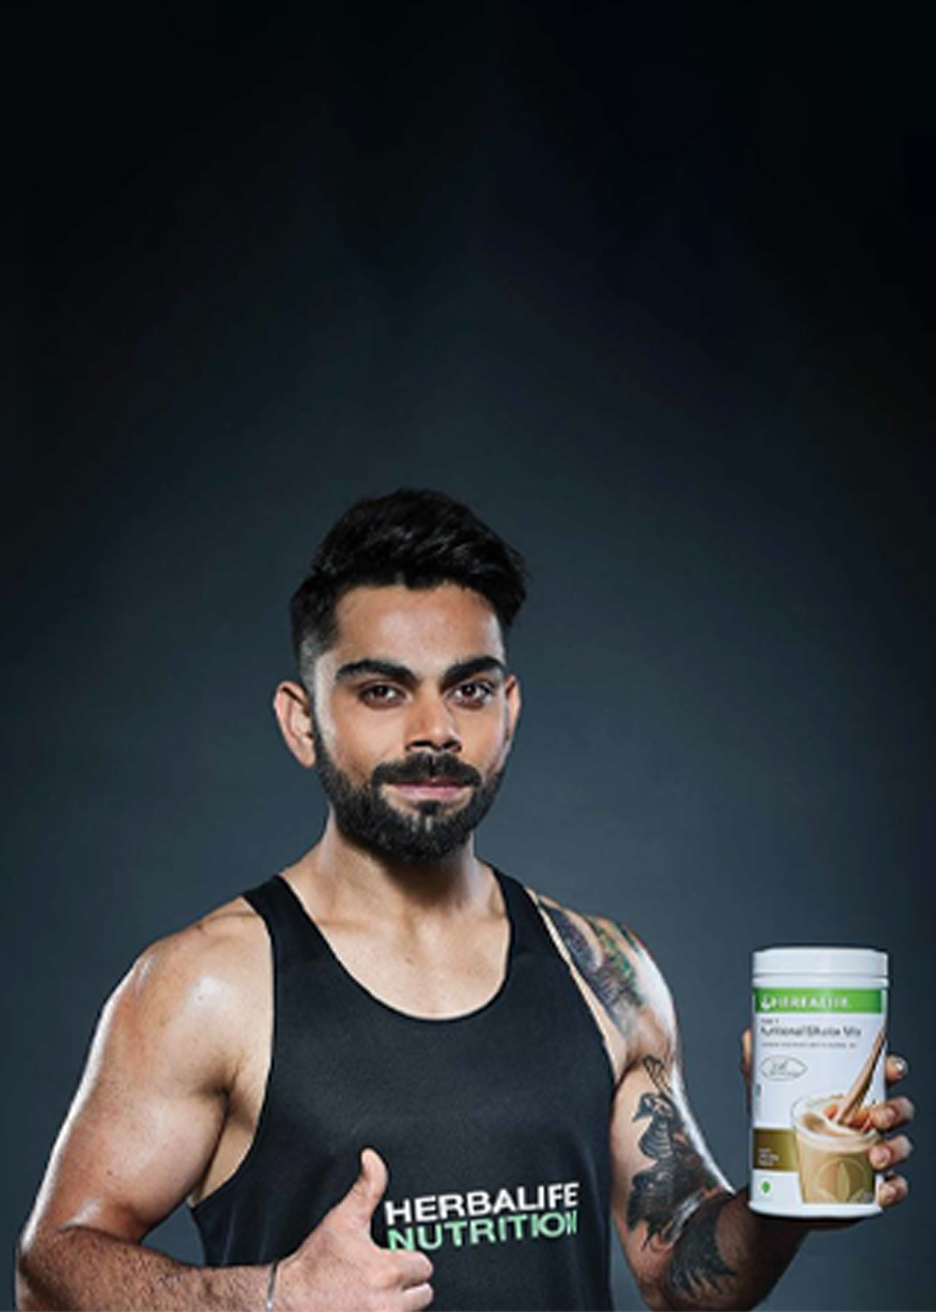 ITW recommended Herbalife to collaborate with the ICC Men's Cricket World Cup 2023 as an associate partner for Disney+ Hotstar for digital streaming